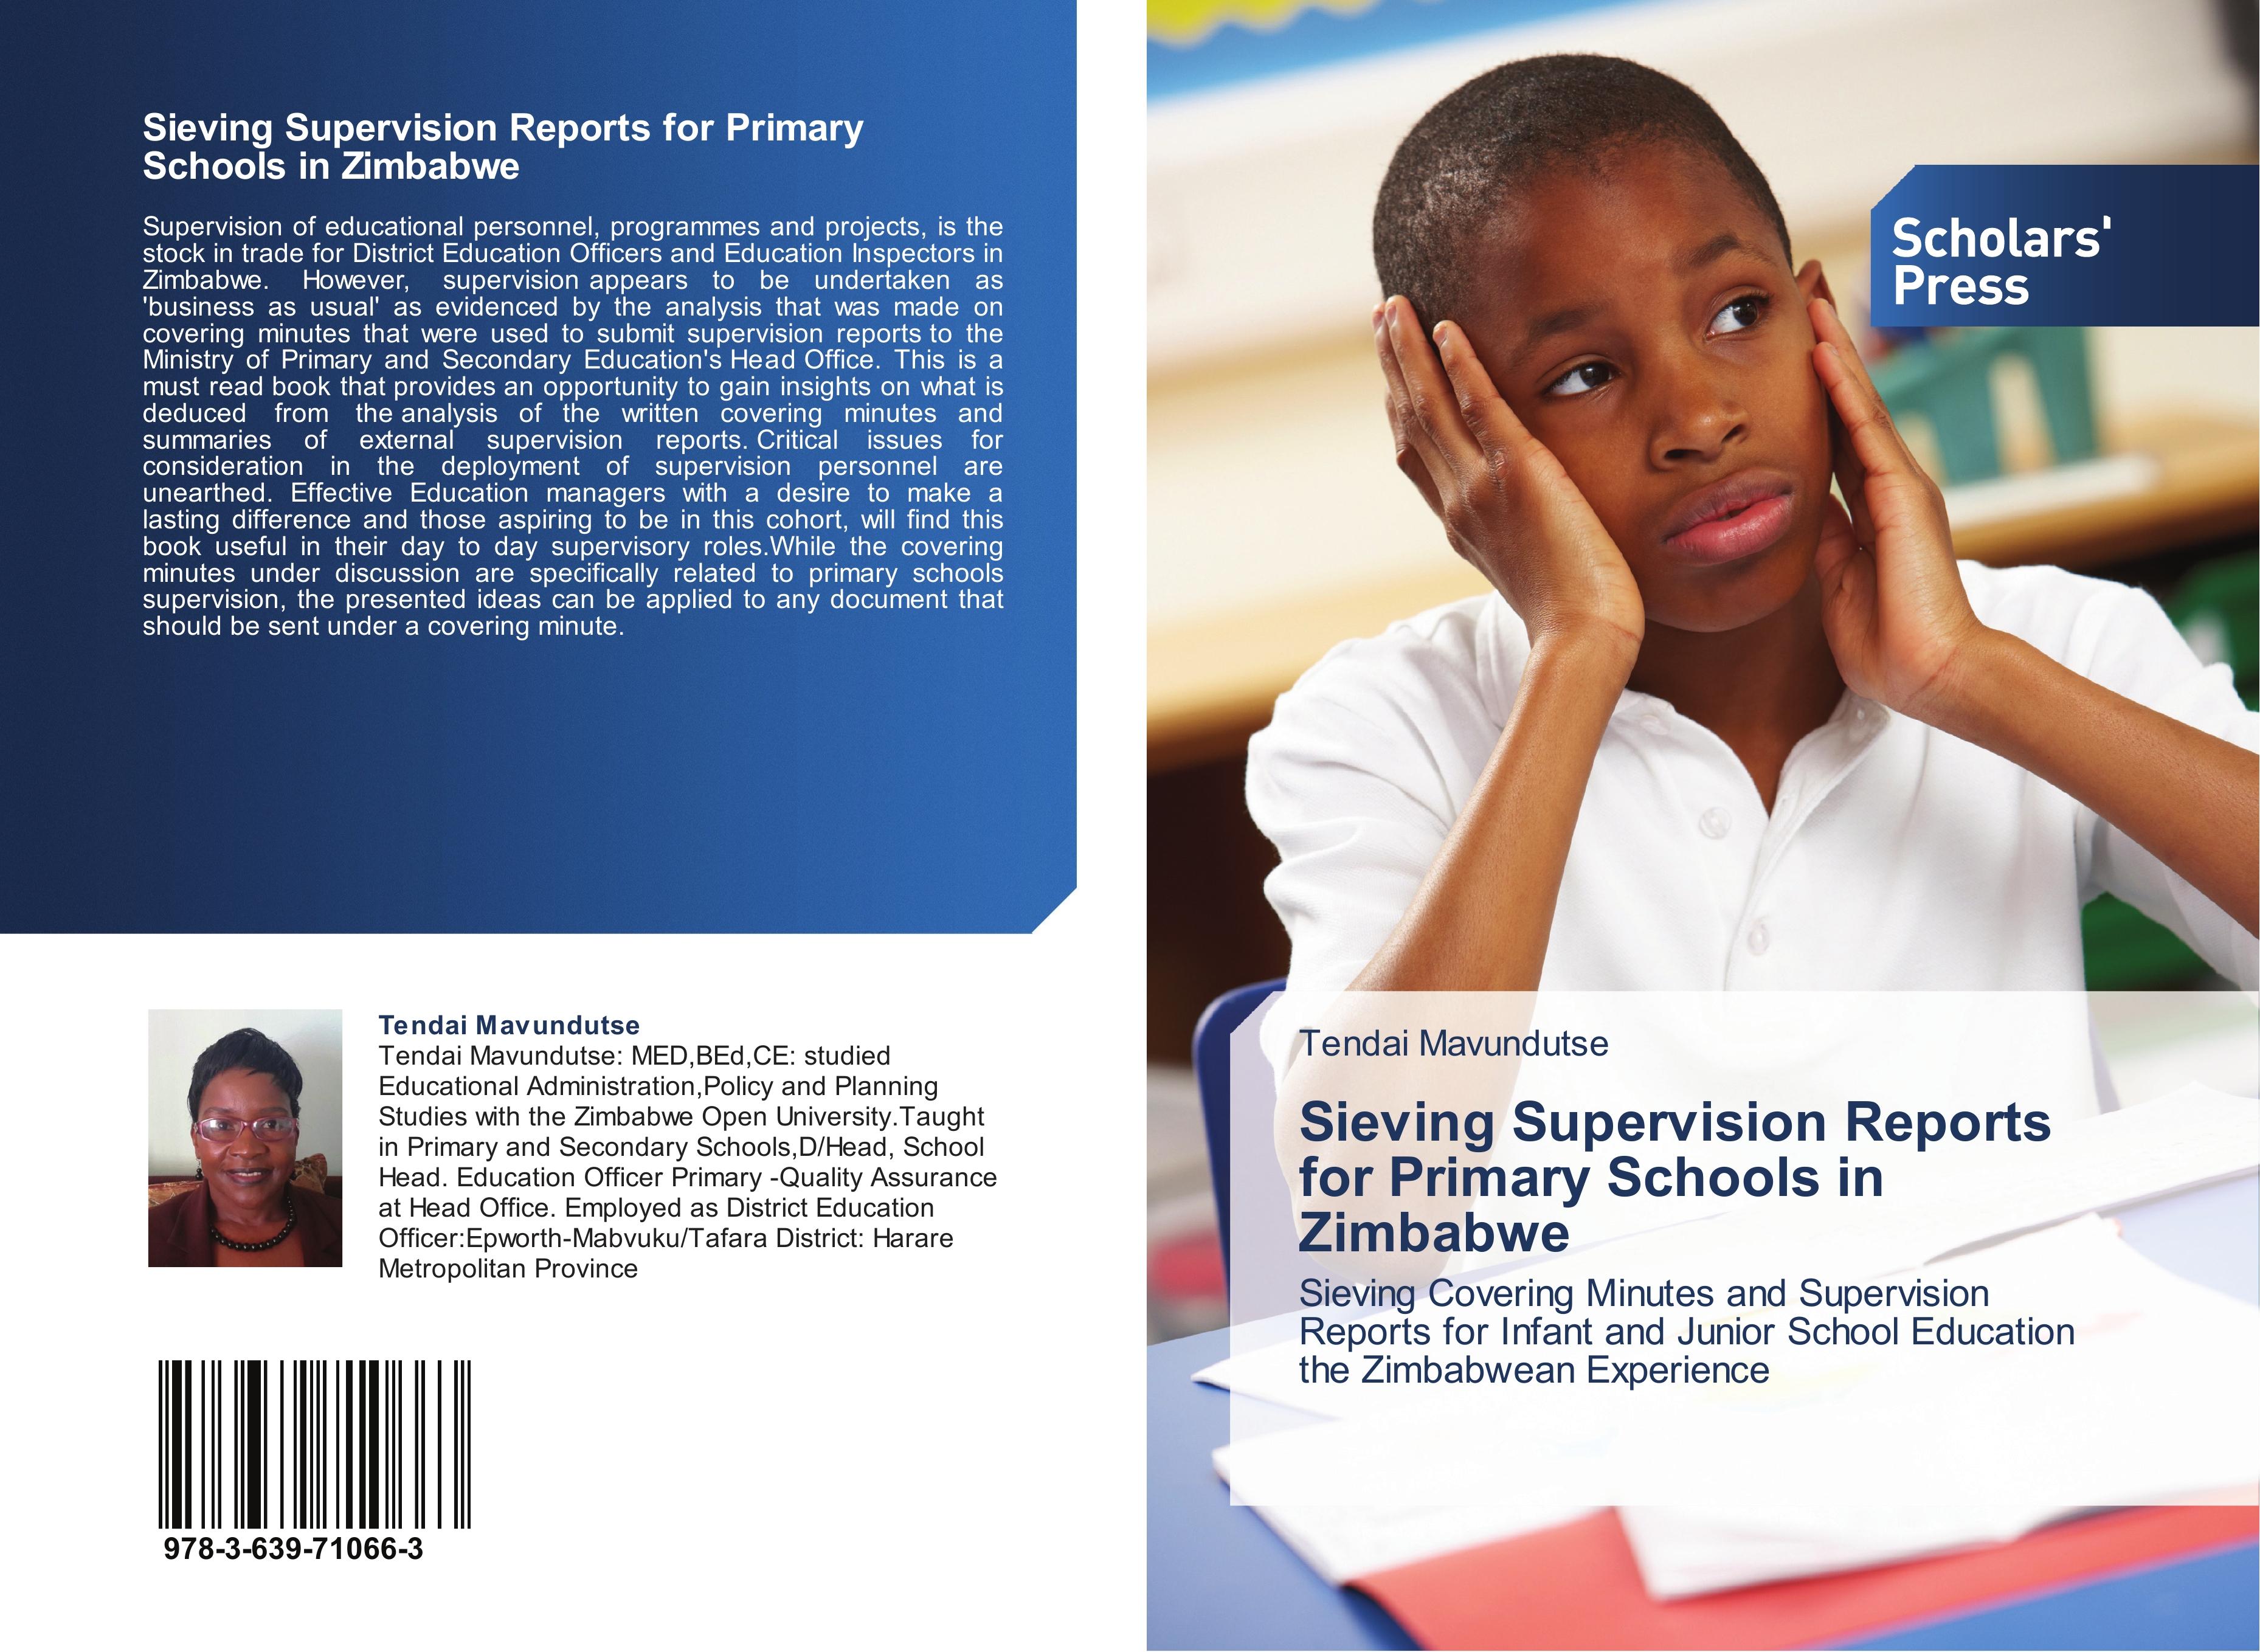 Sieving Supervision Reports for Primary Schools in Zimbabwe - Tendai Mavundutse